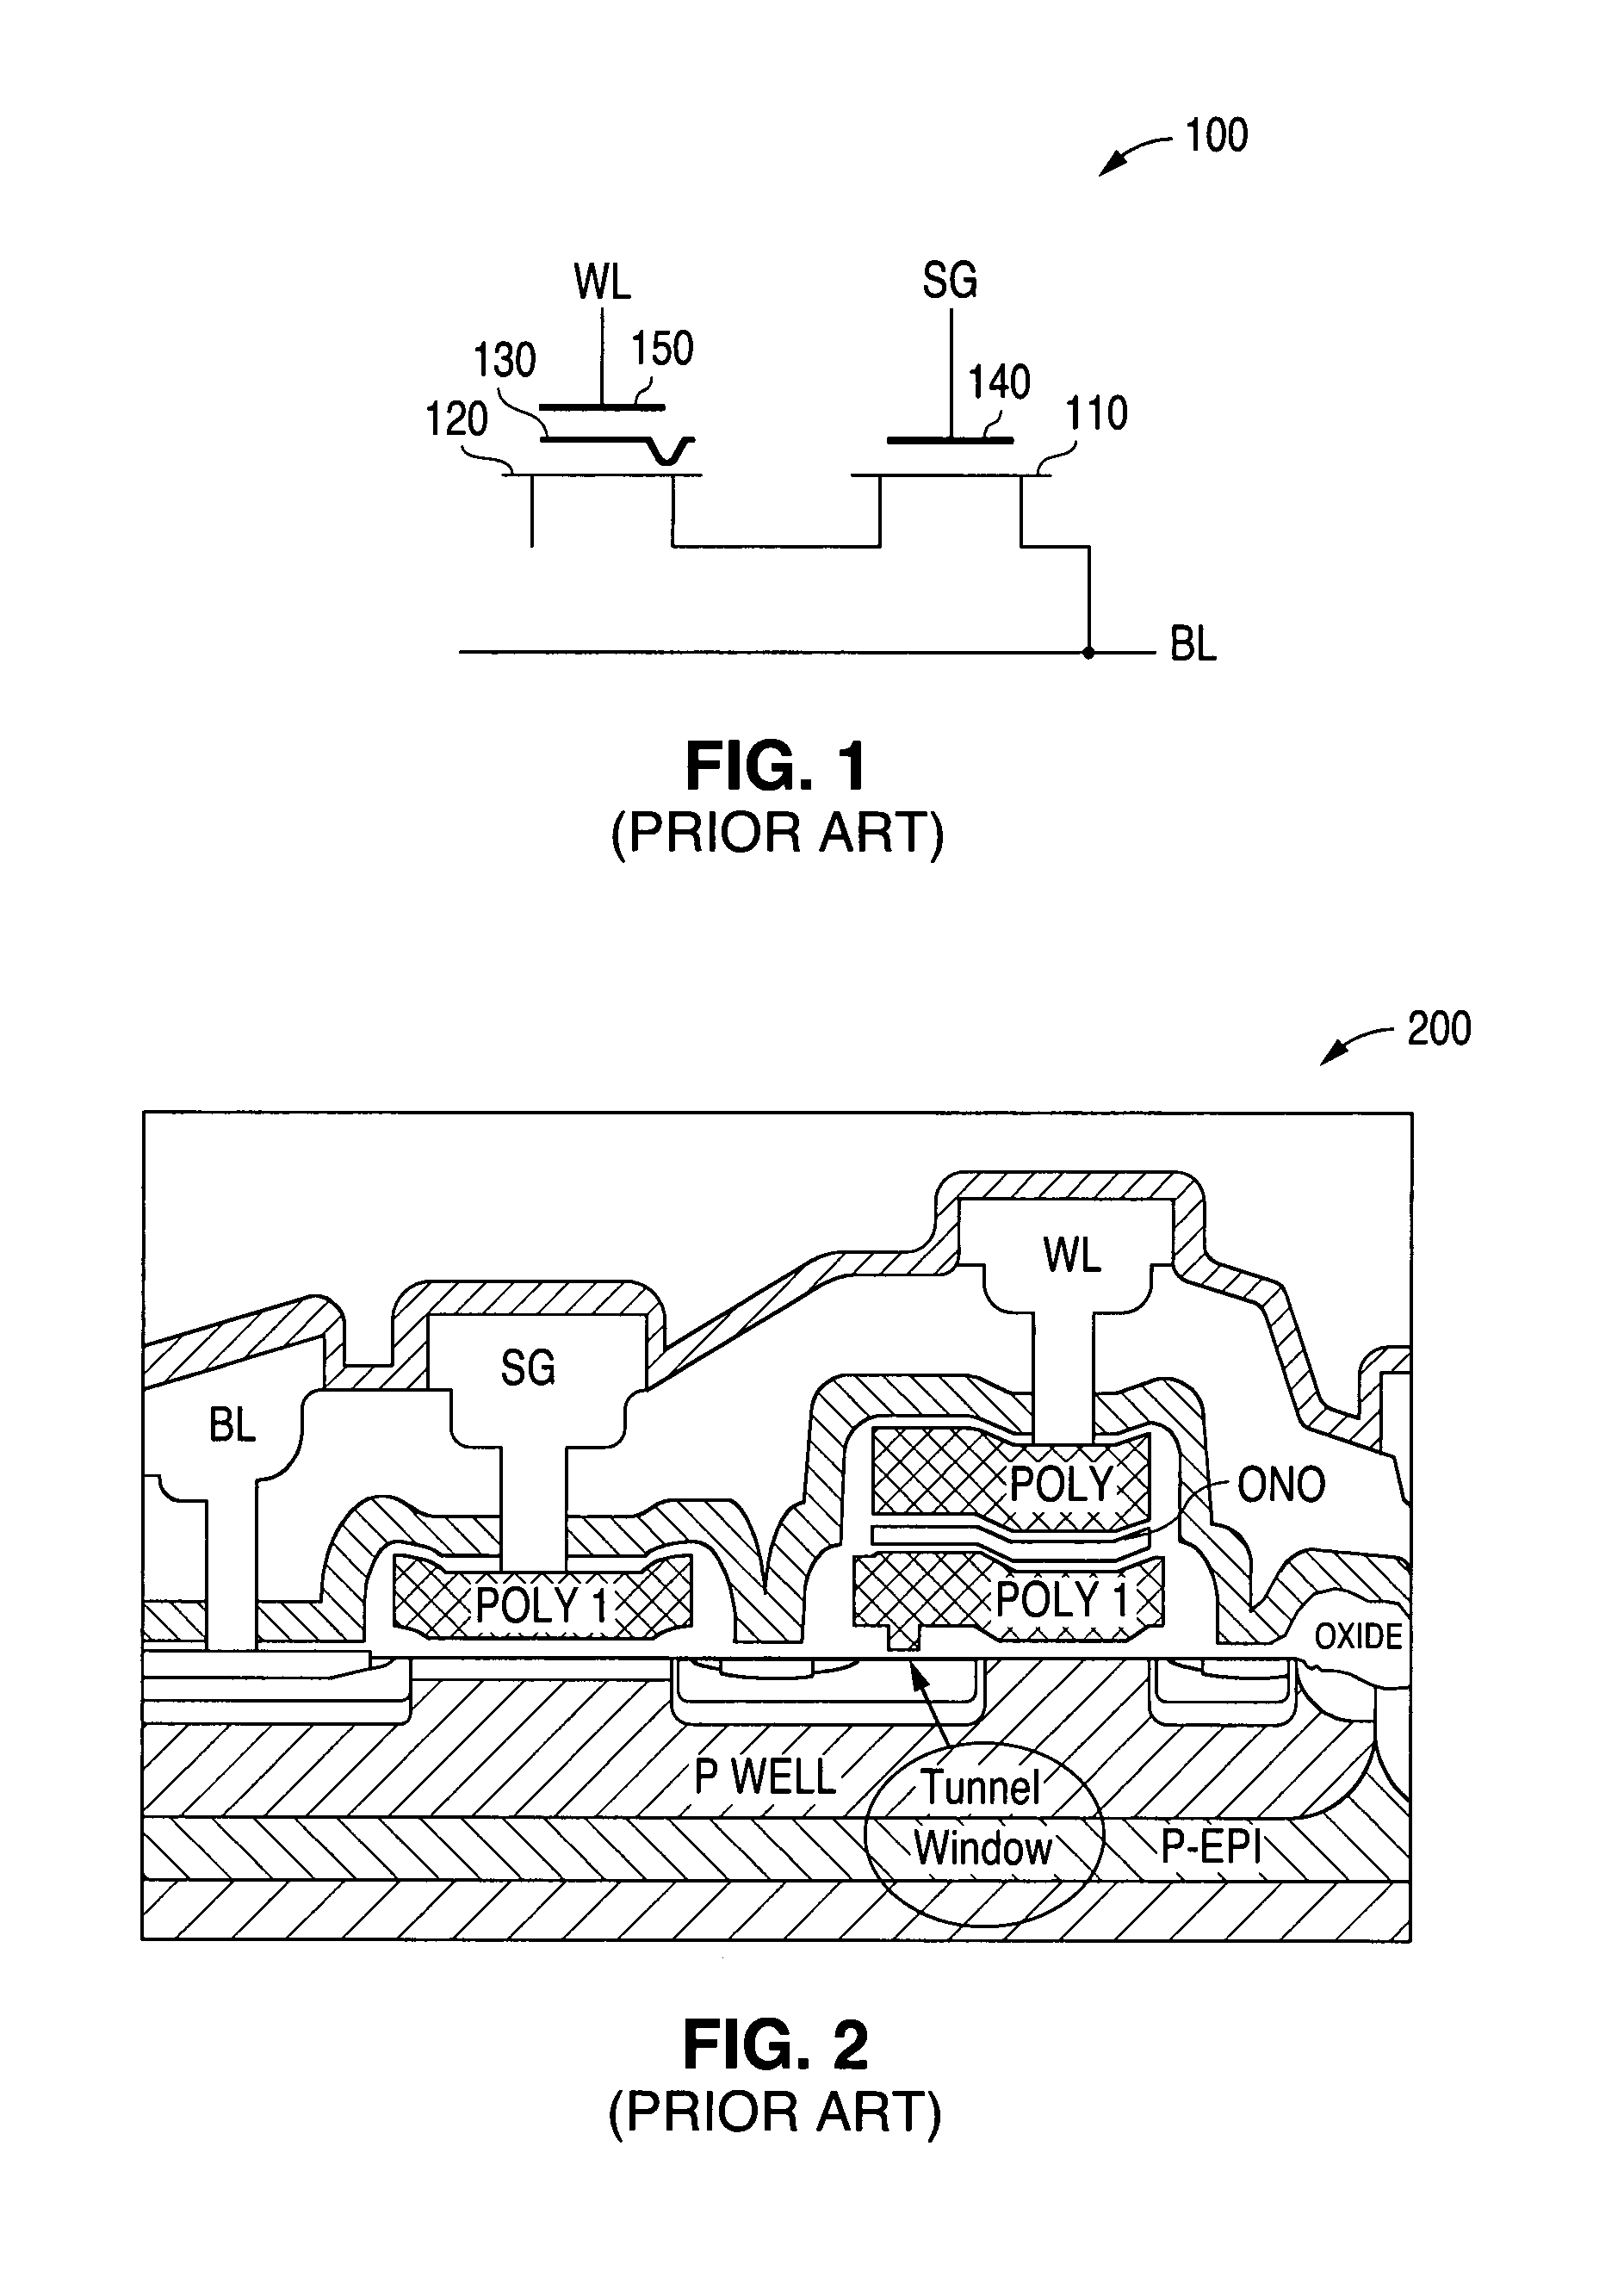 System and method for providing an EPROM with different gate oxide thicknesses